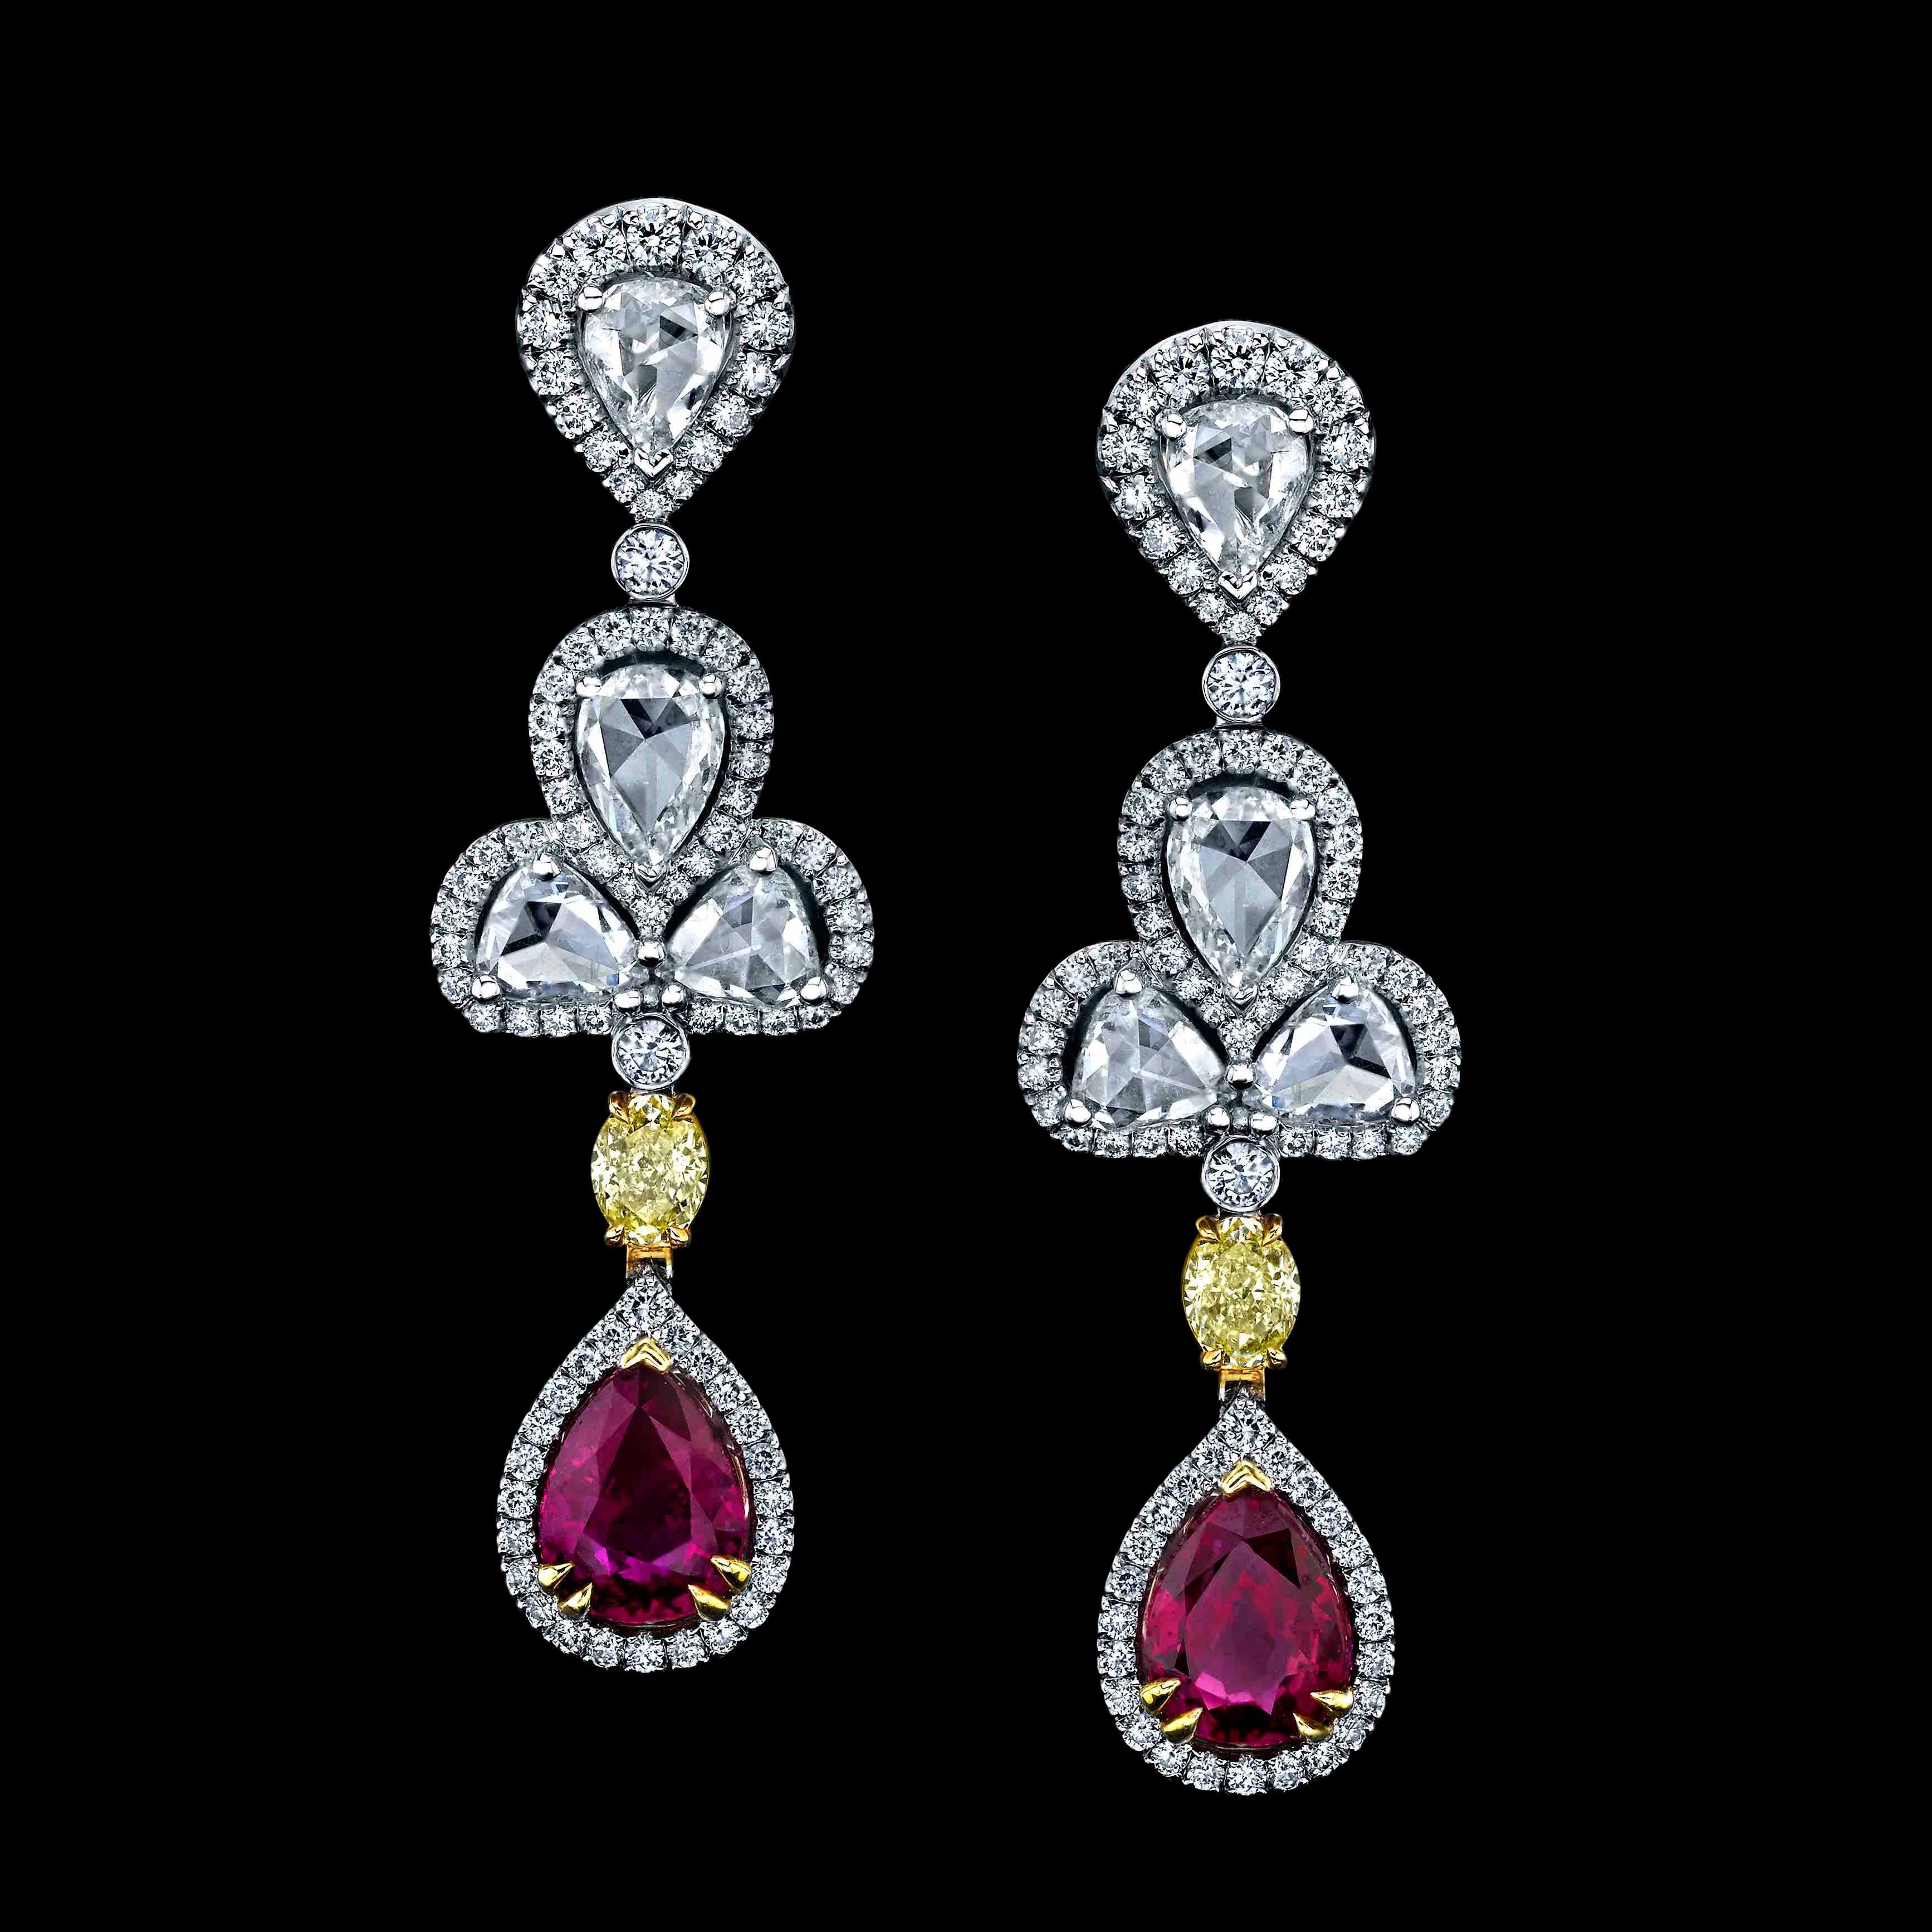 A beautiful pair of Extraordinary Ruby & Fancy Yellow Diamond Drop Earrings, set with a pair of Pear-shaped Pinkish Red Rubies weighing 2.77cts and certified by TGL. The rubies are styled with Fancy Yellow ovals, collection color rose-cuts, and pave